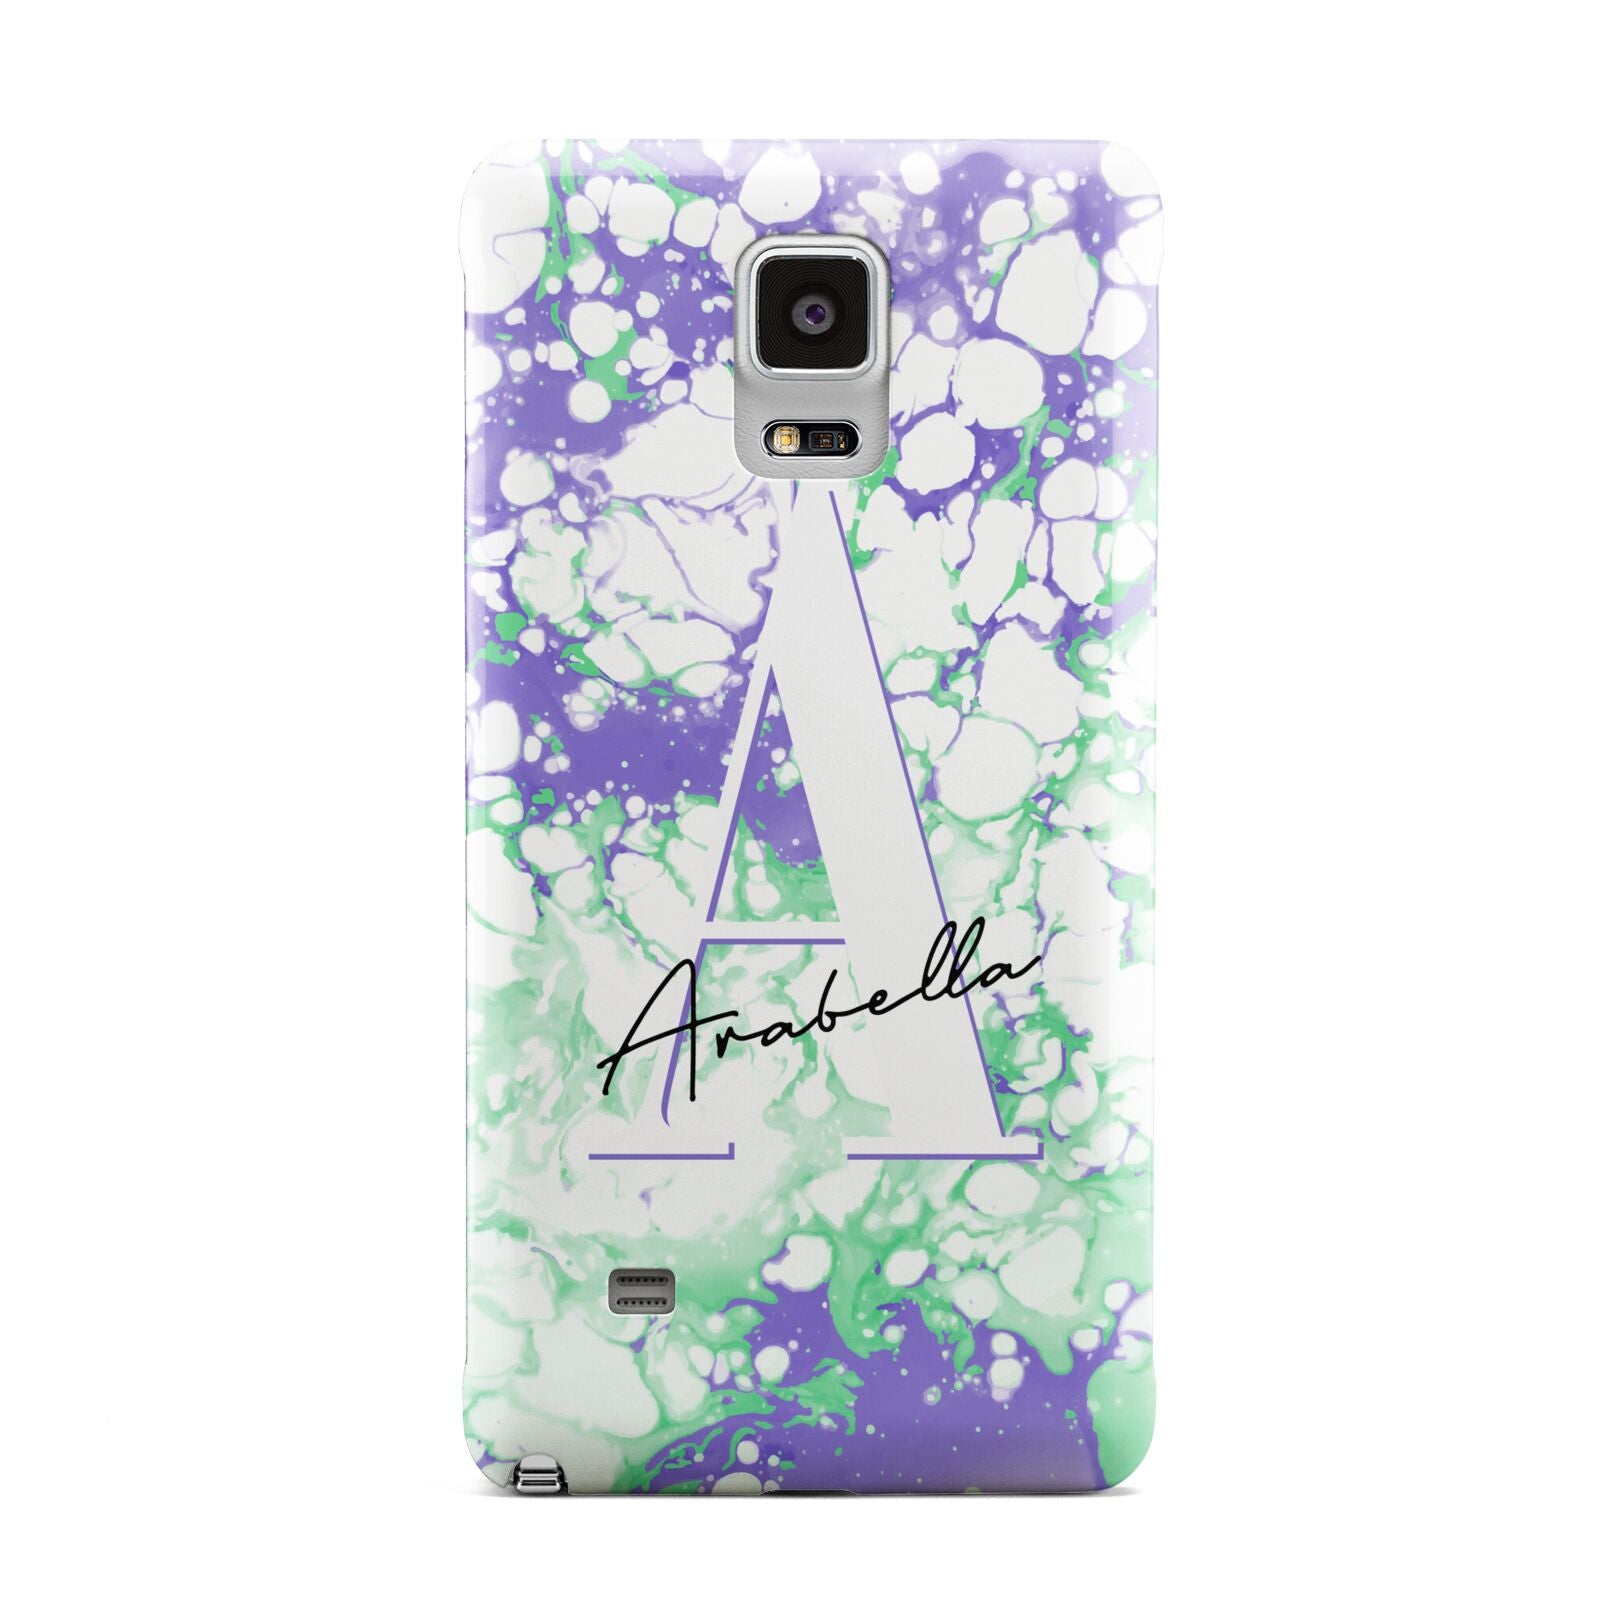 Personalised Liquid Marble Samsung Galaxy Note 4 Case